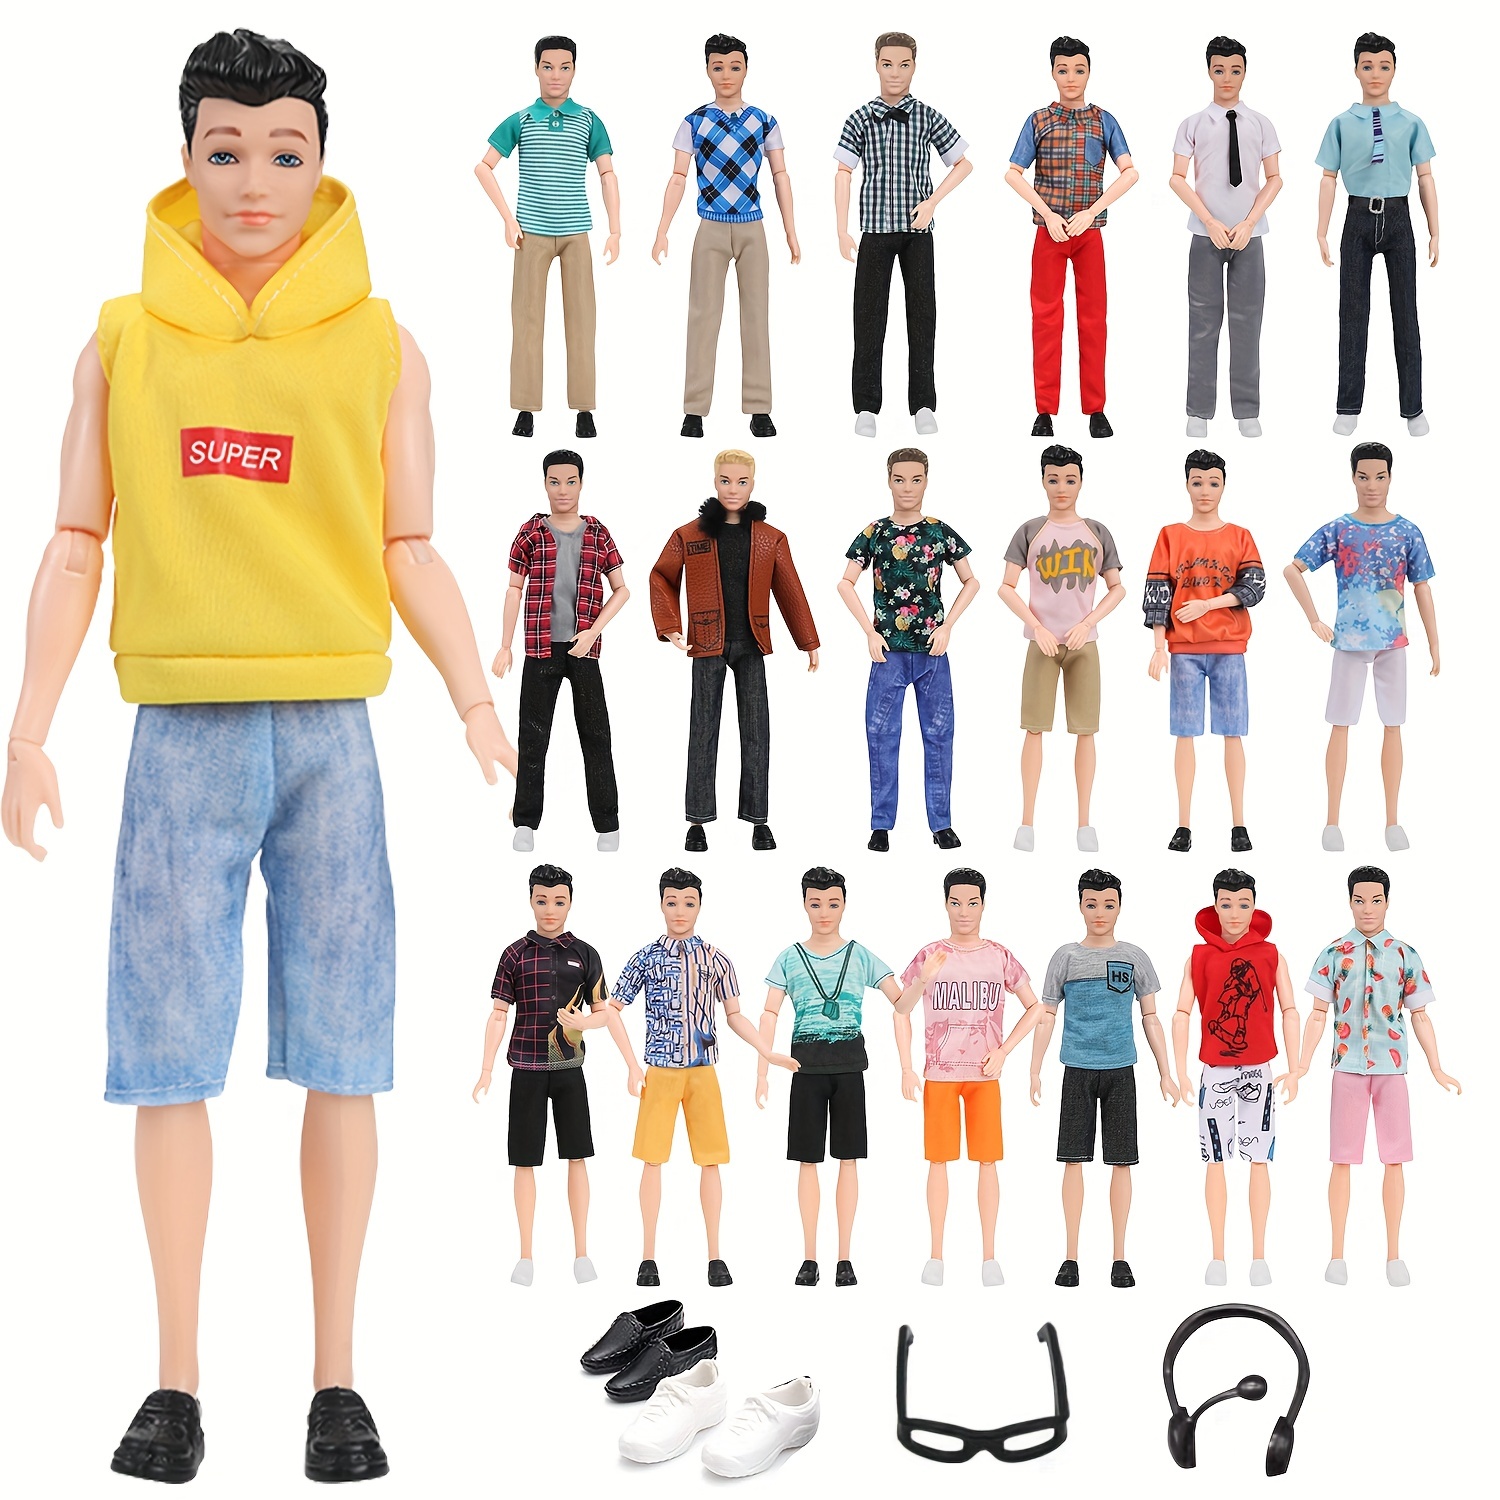 Ken Doll Clothes Doll Daily Wear Casual Suit Shirt+Pants Wedding Party Suit  Man Male Doll Clothes For 30cm Ken Doll Accessories - AliExpress